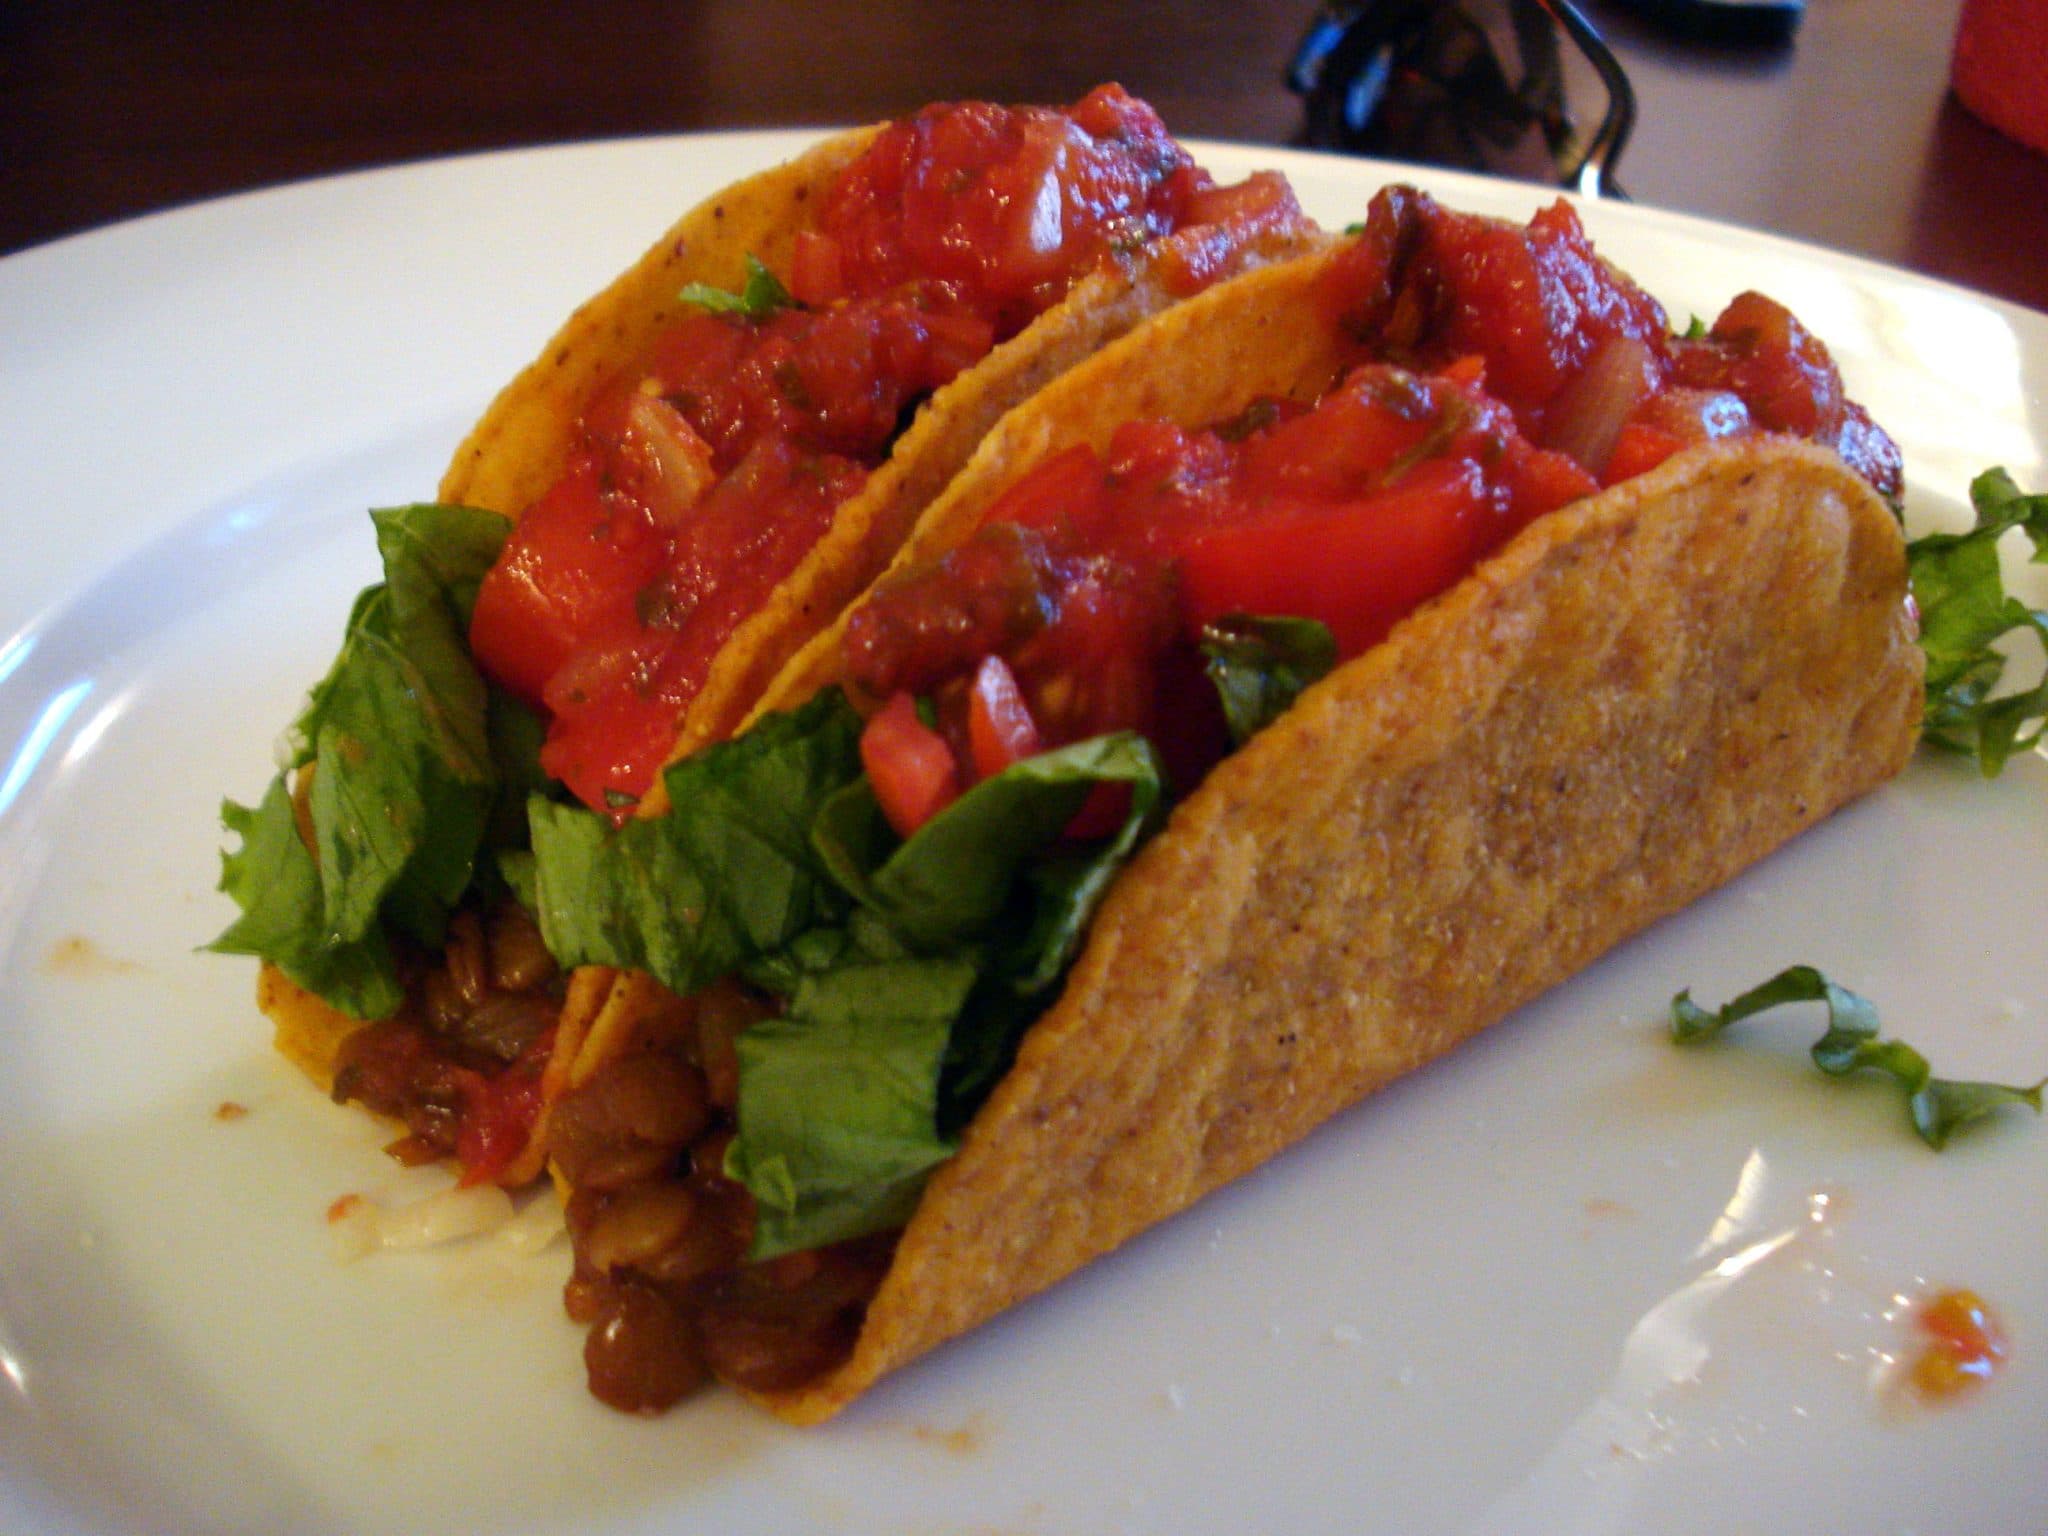 2 lentil tacos with shredded lettuce and fresh tomatoes, topped with salsa